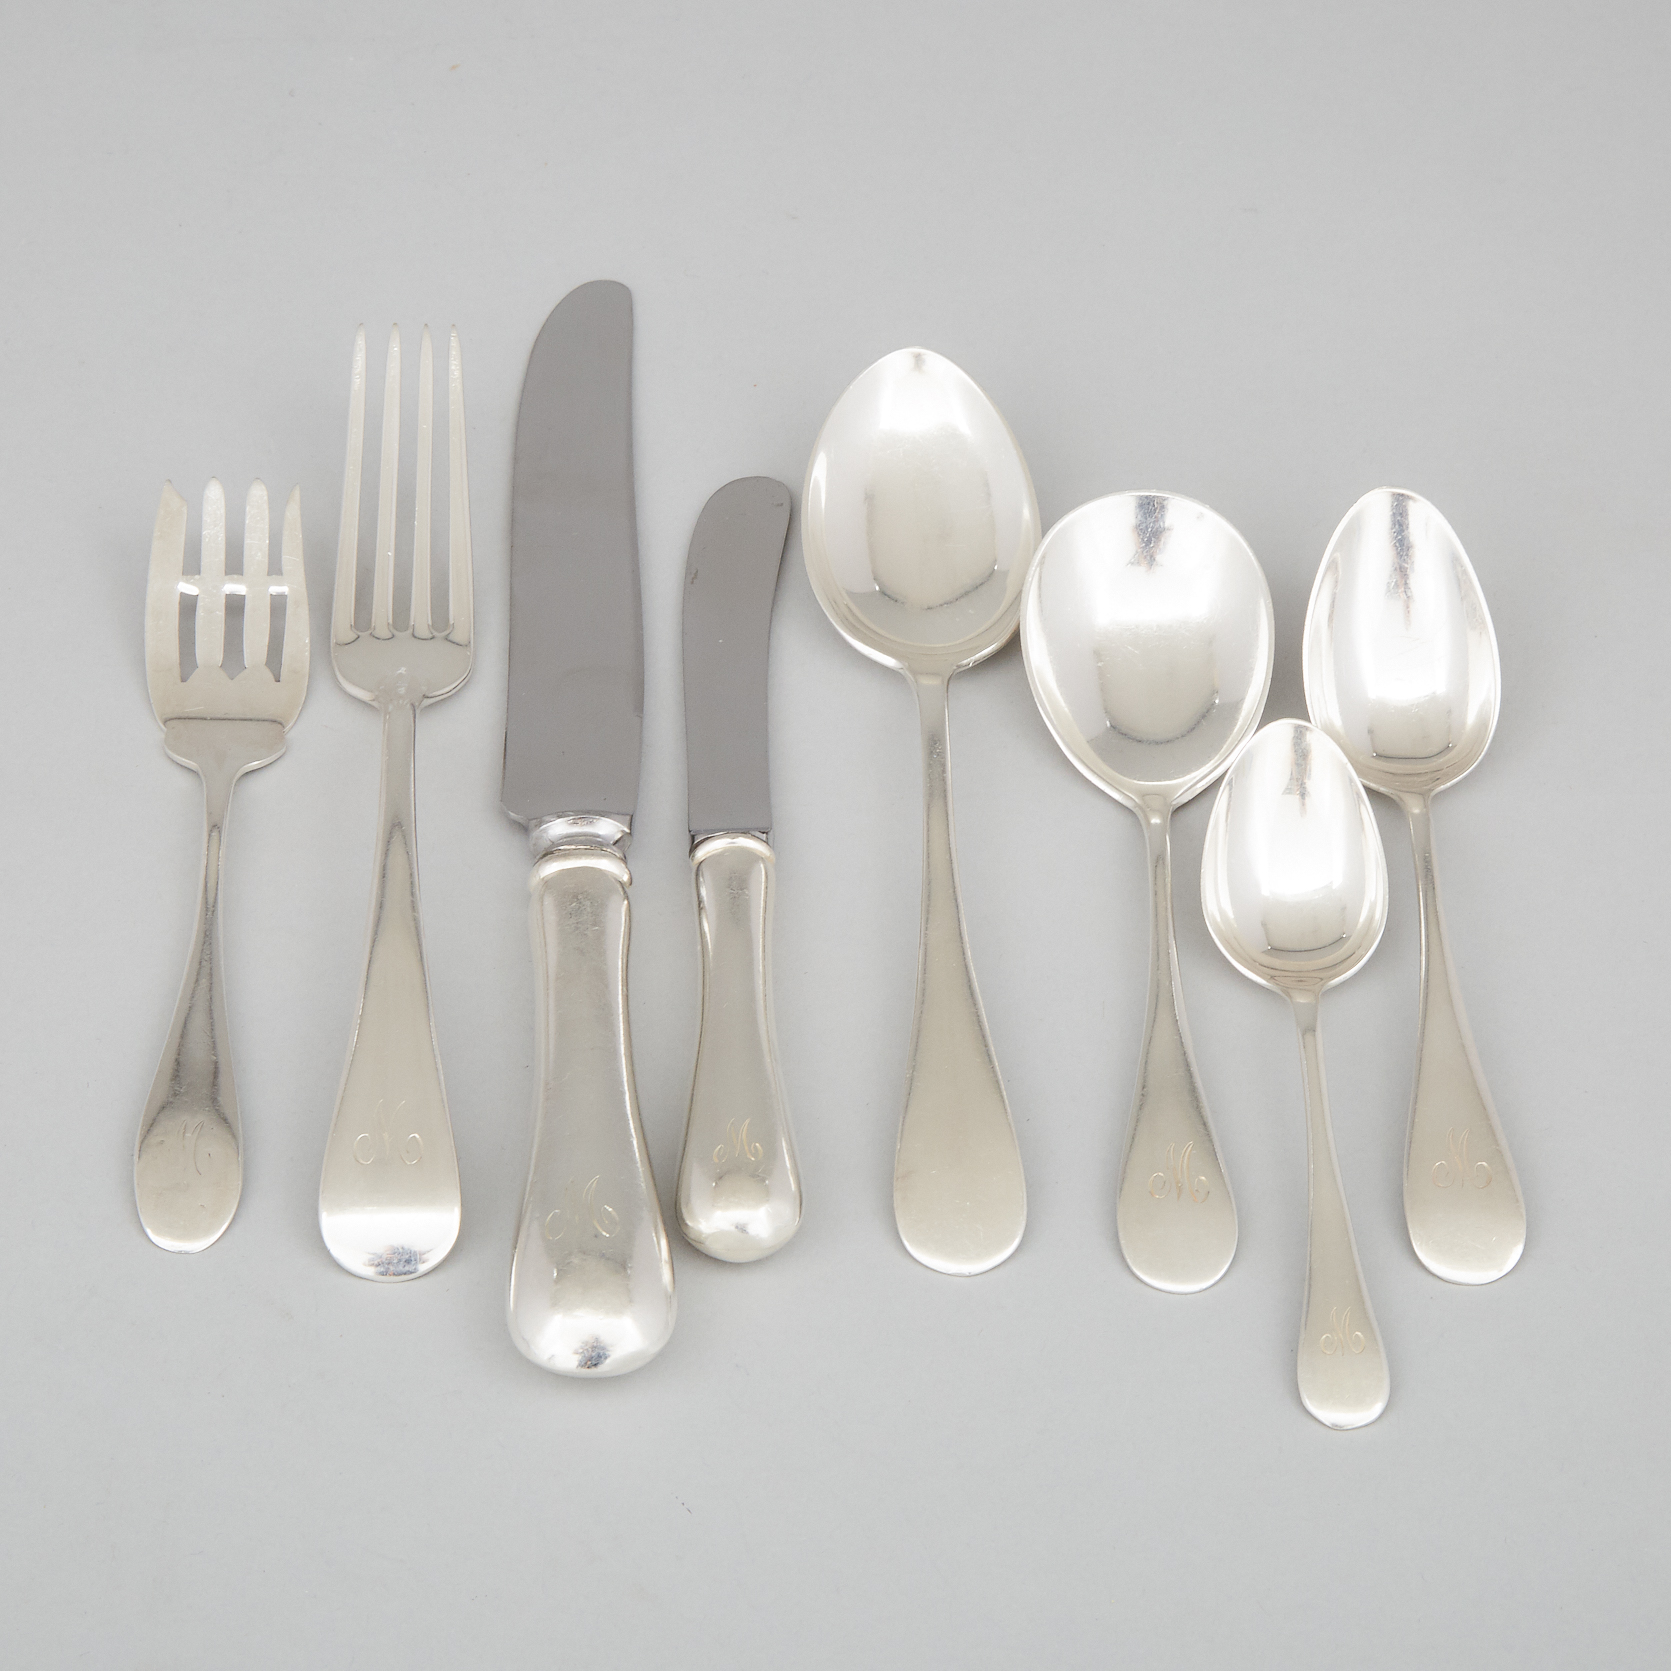 Canadian Silver ‘Old English’ Pattern Flatware Service, Henry Birks & Sons, Montreal, Que. and Roden Bros., Toronto, Ont., 20th century